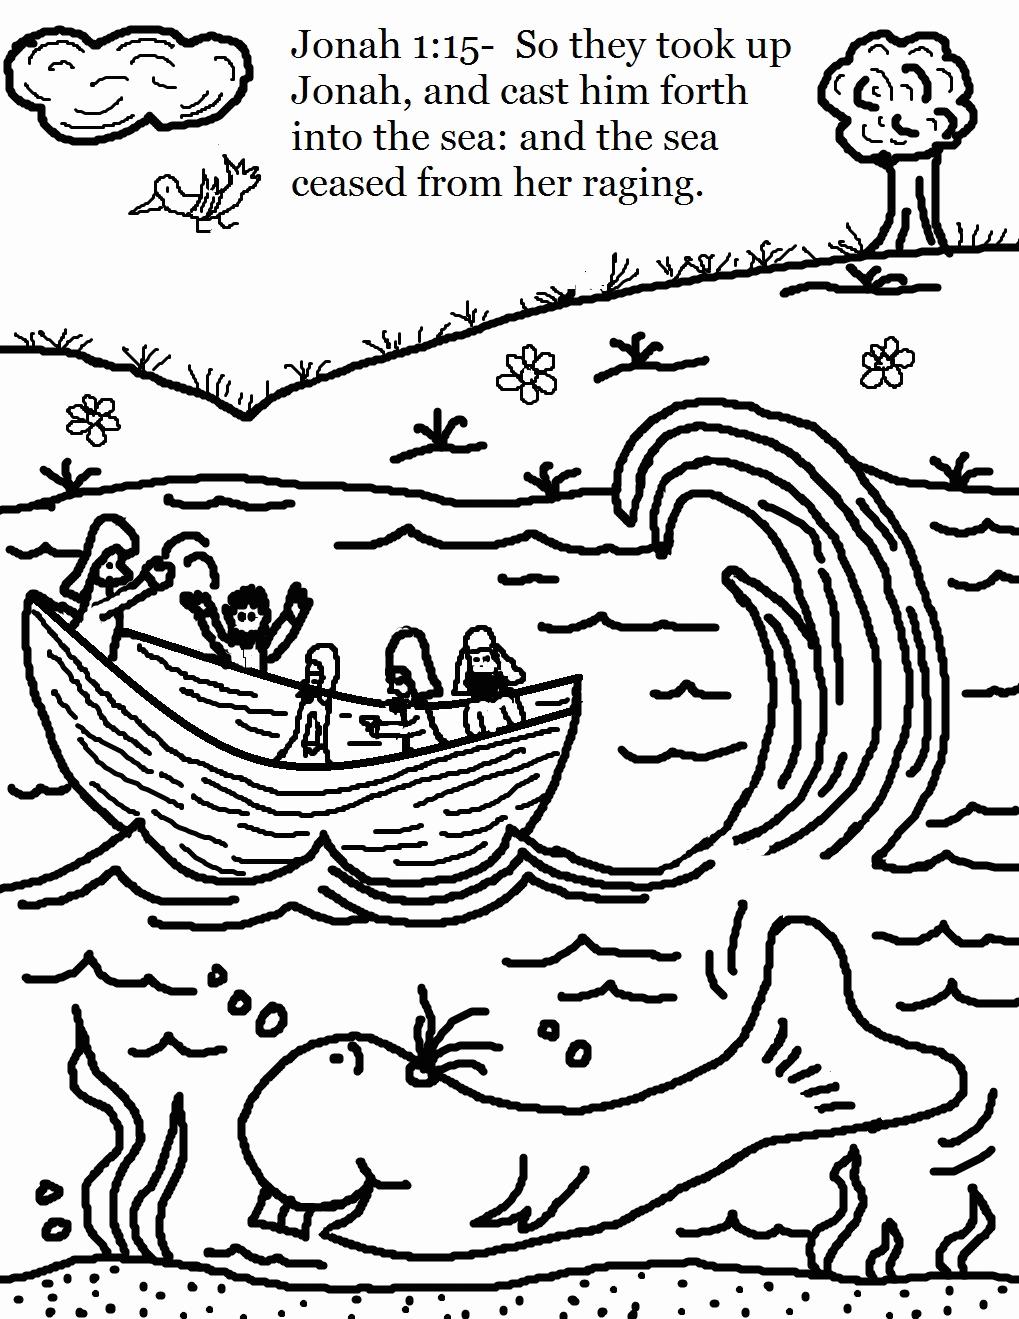 Jonah And The Whale Coloring Pages   Forcoloringpages.com ...